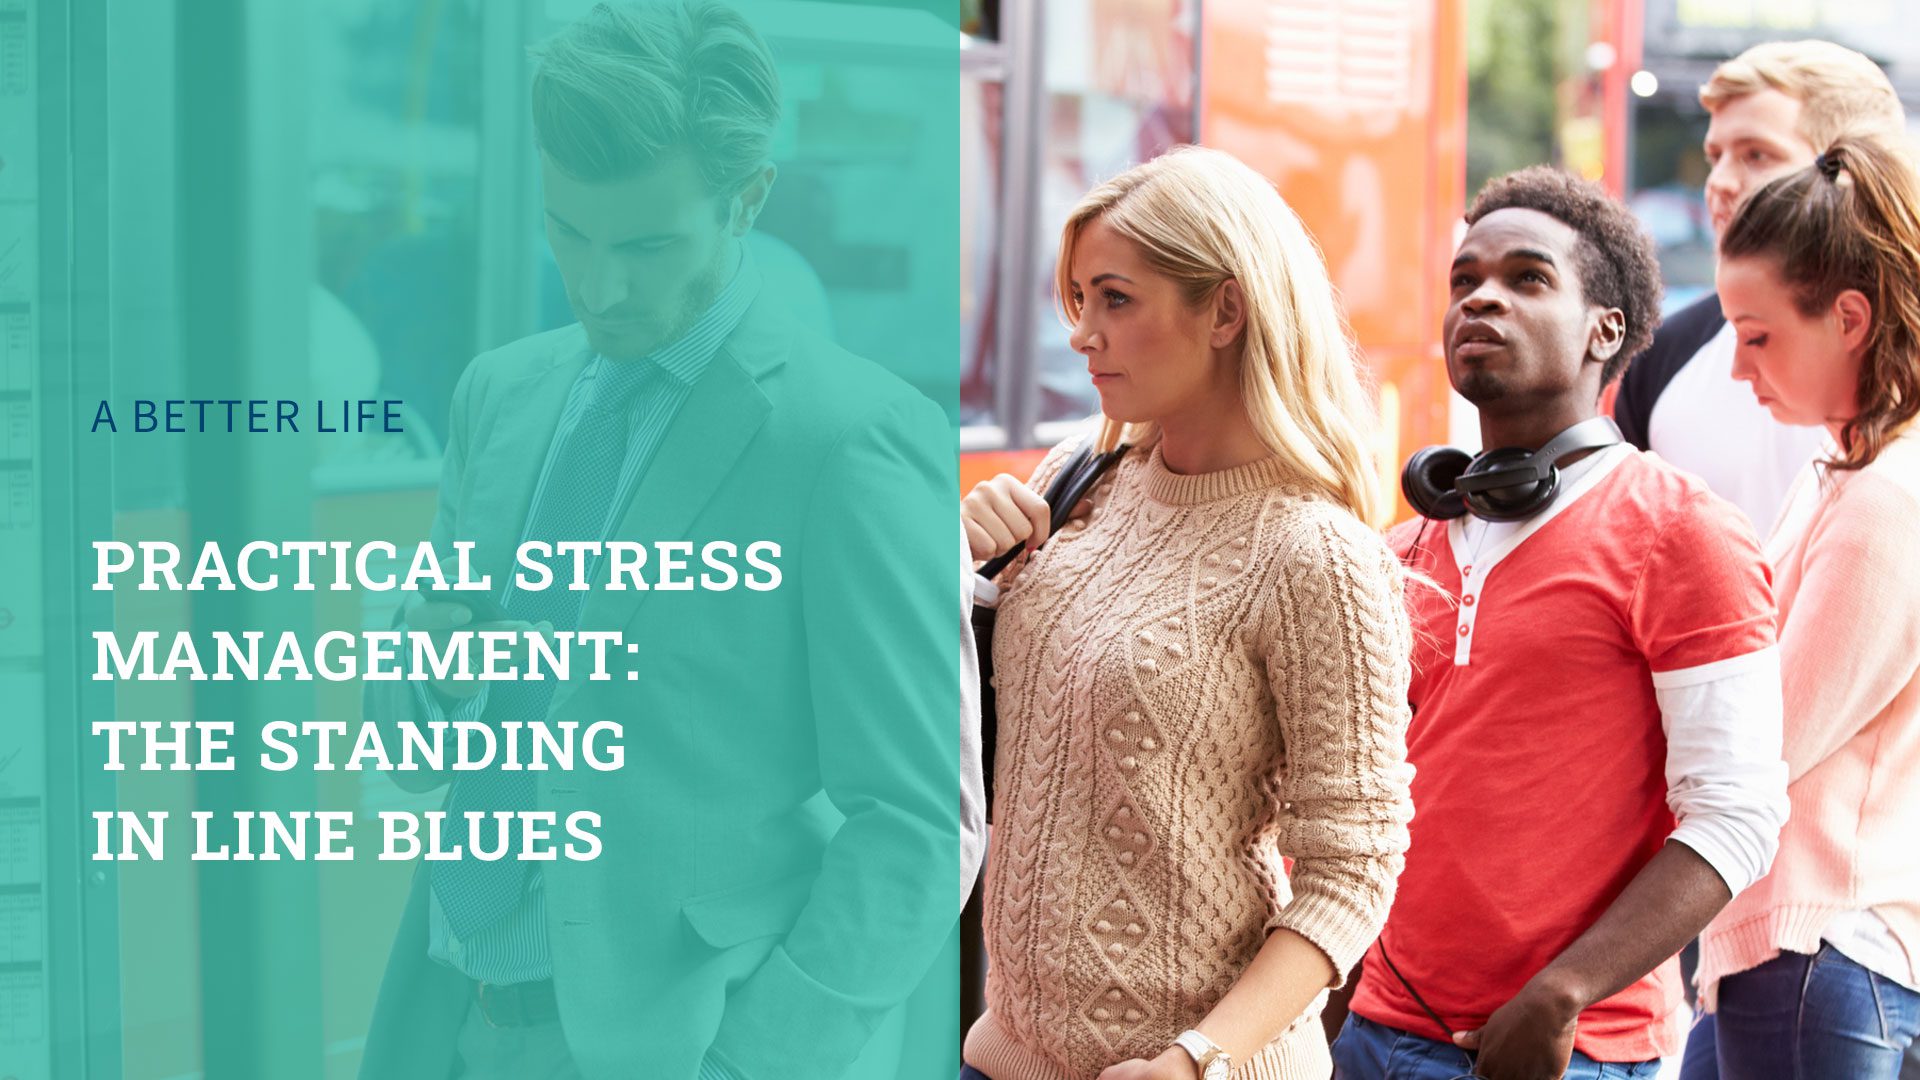 Practical Stress Management: The Standing in Line Blues